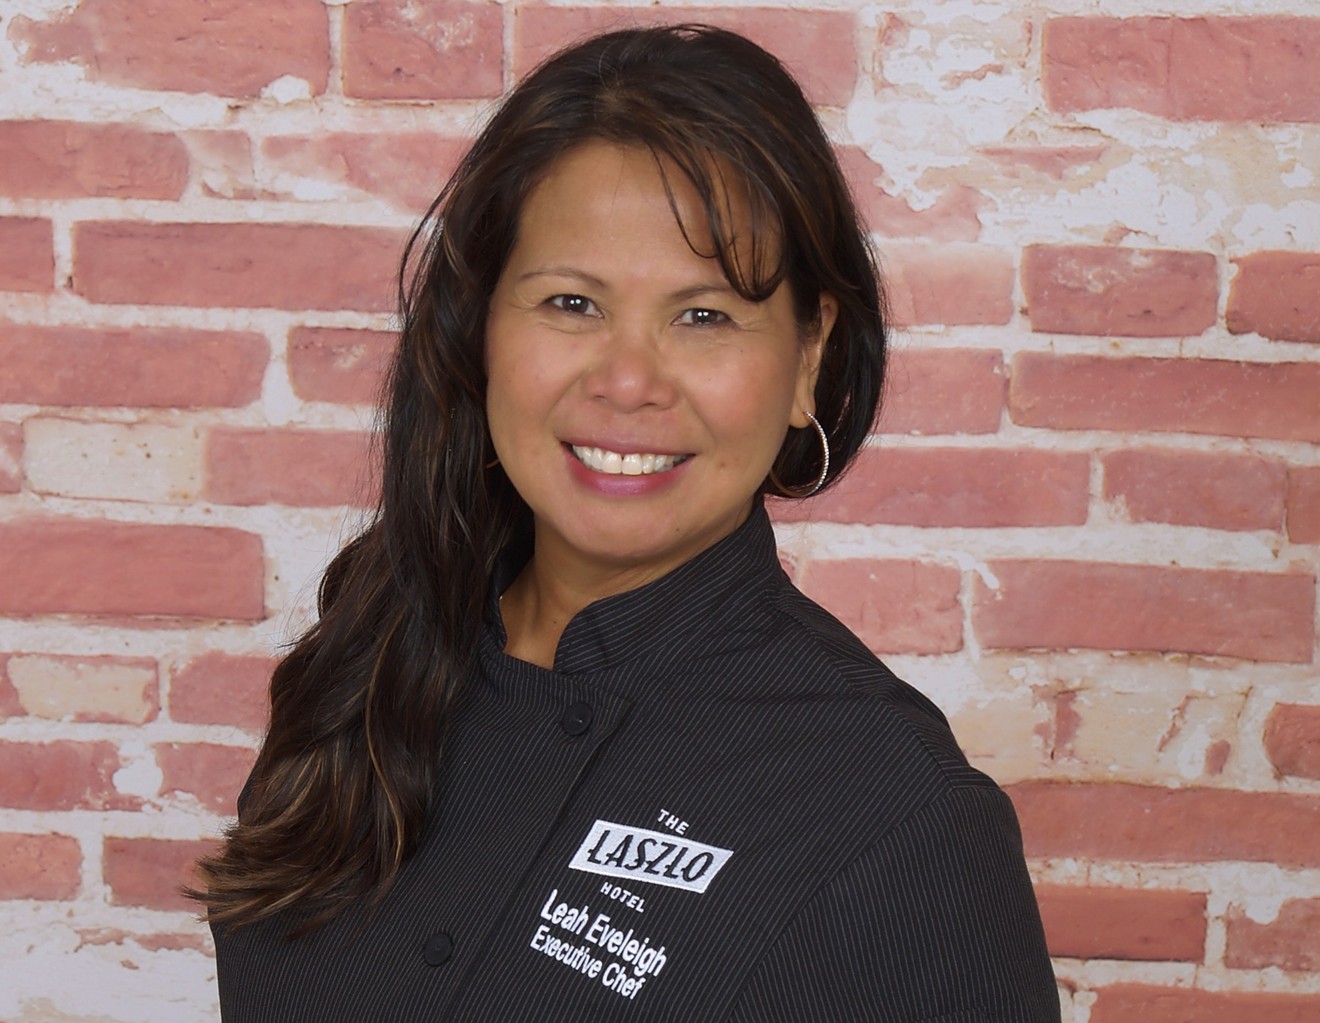 Leah Eveleigh is the Laszlo's first executive chef.